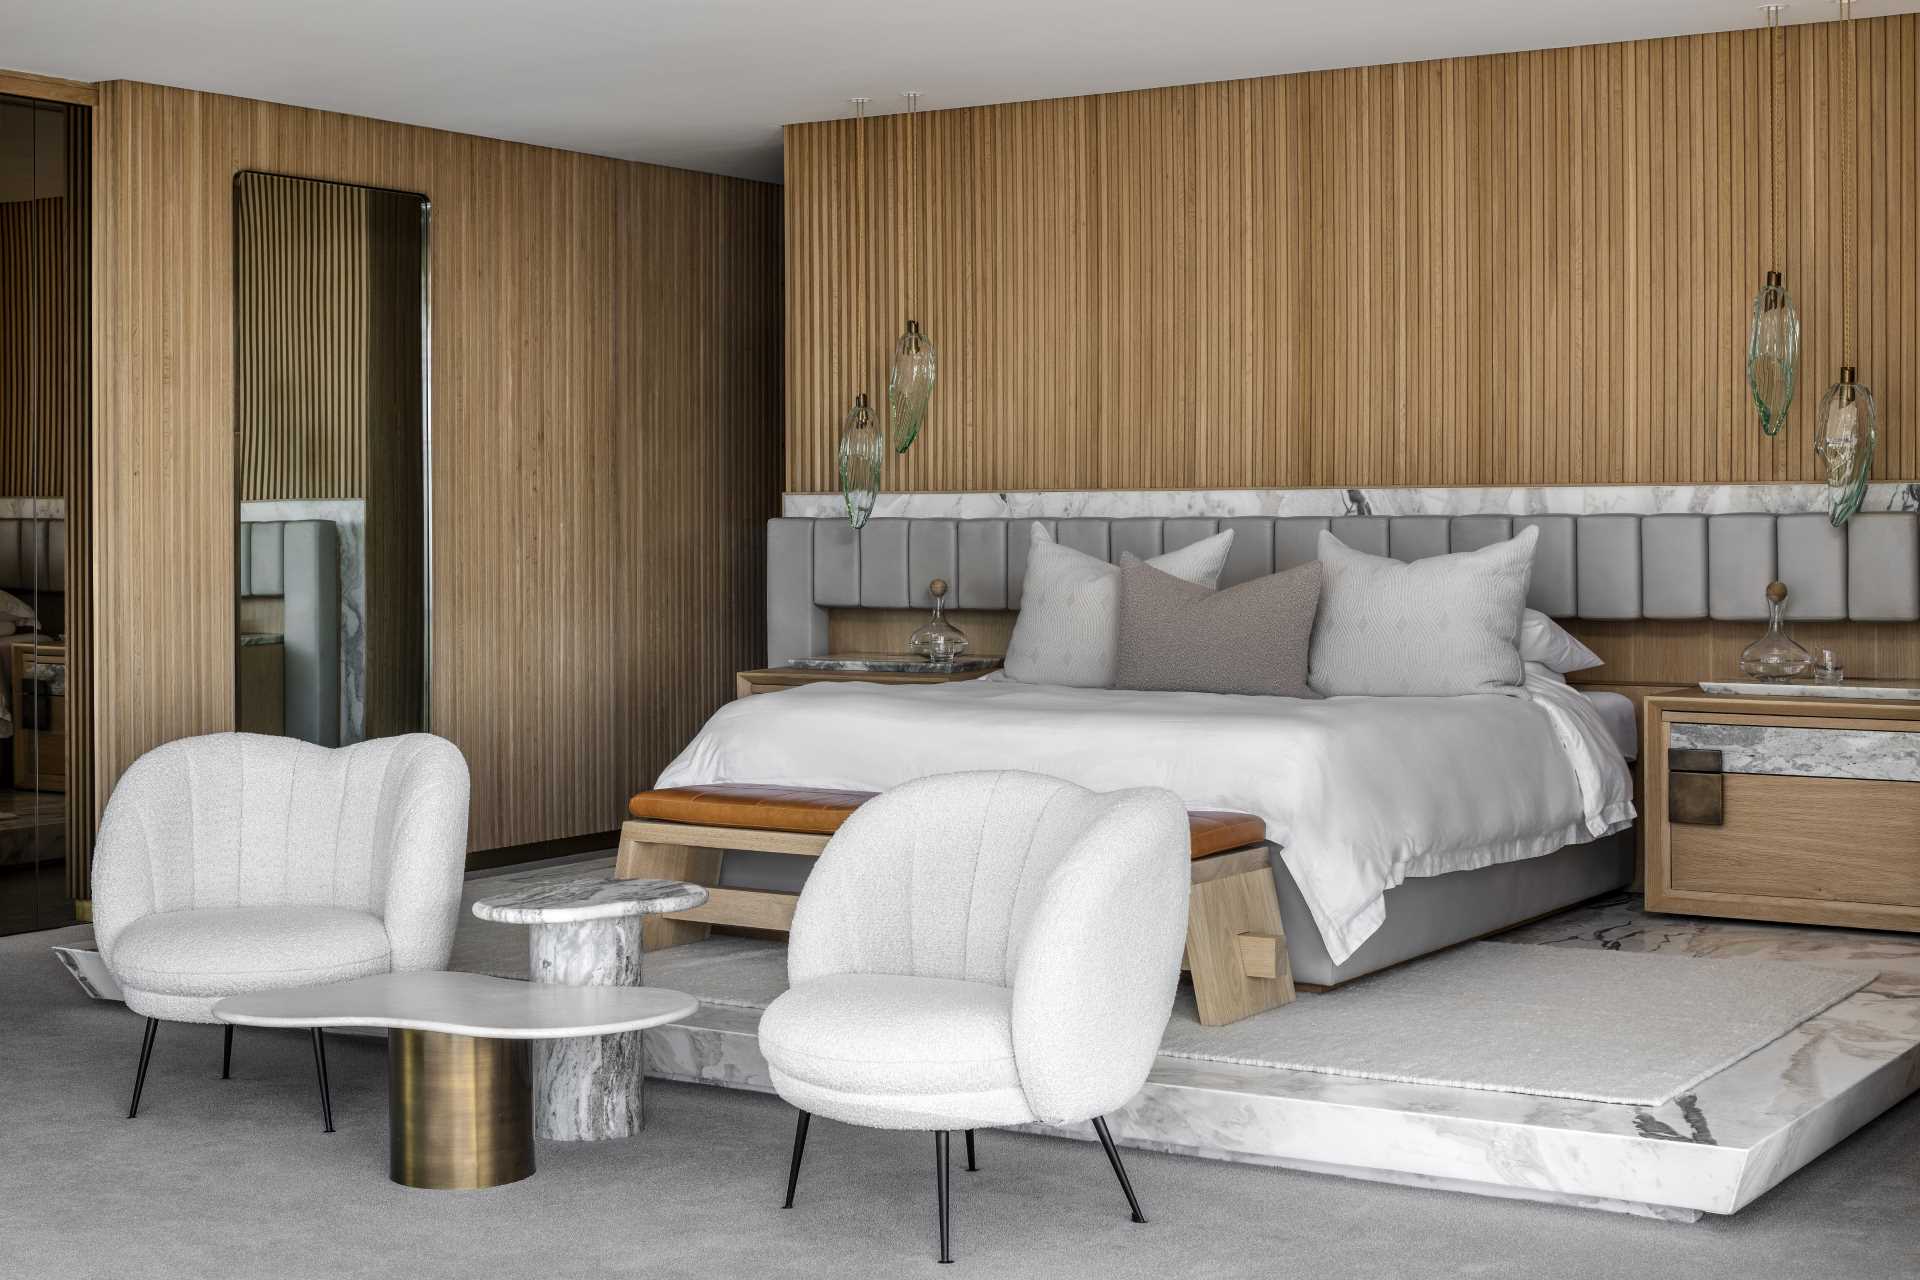 This main bedroom suite has wood walls, a bed that's elevated on a marble platform, and a headboard that spans the width of the bed and the bedside tables.